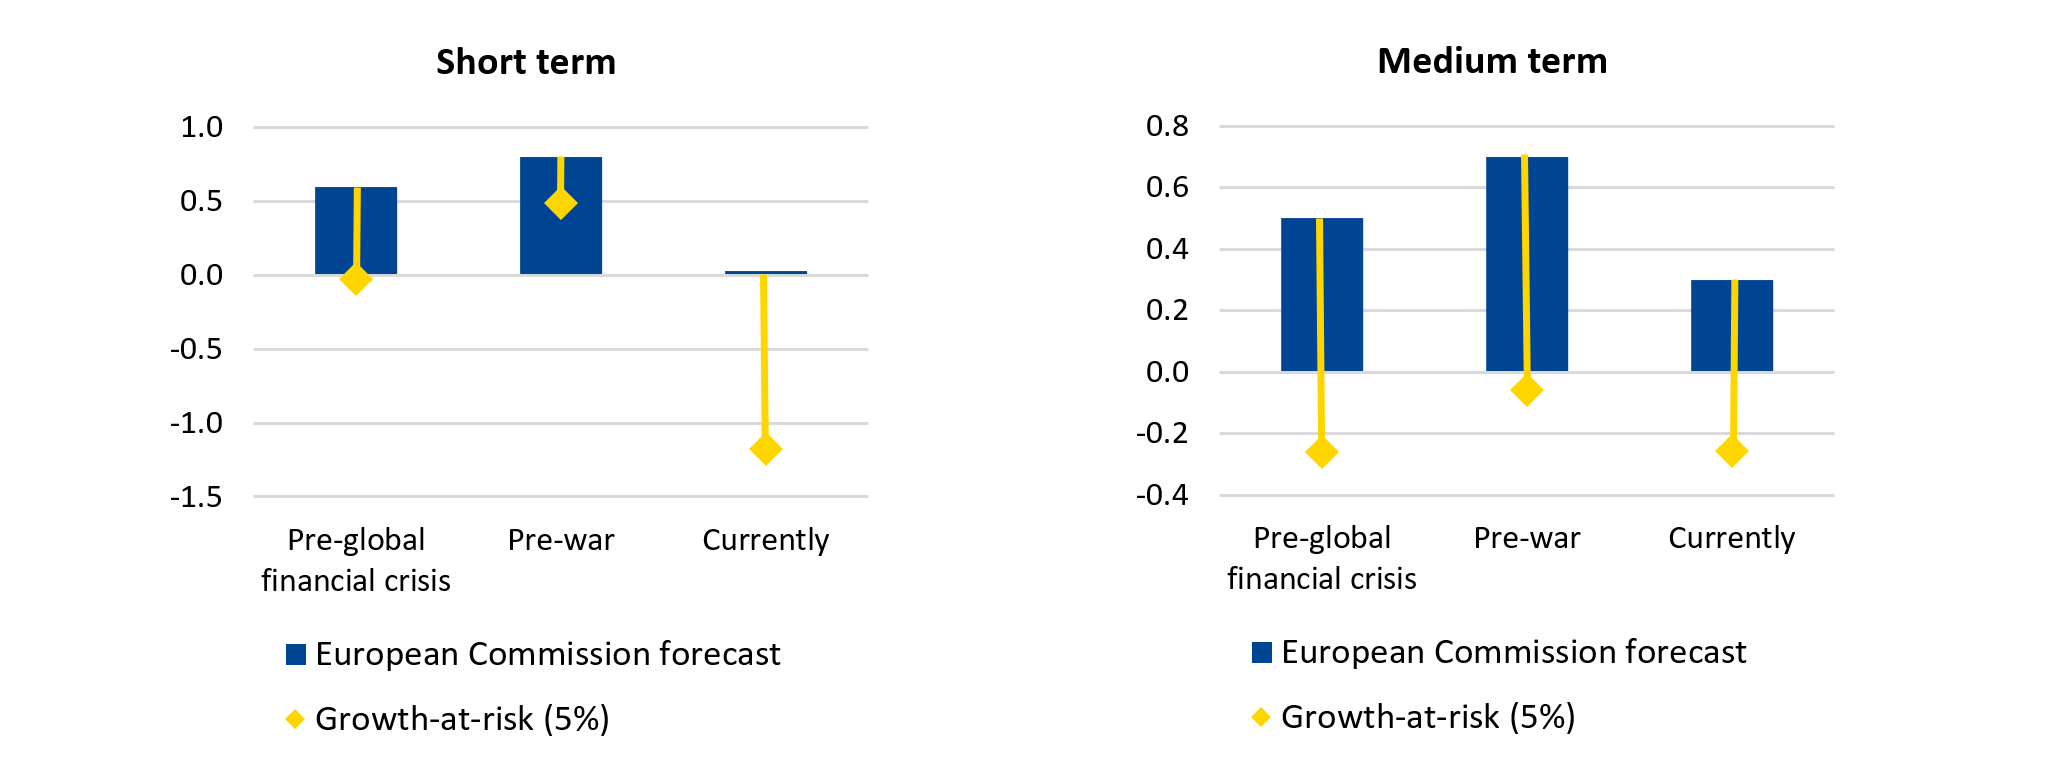 Figure 2: Euro area GDP growth forecasts and risks